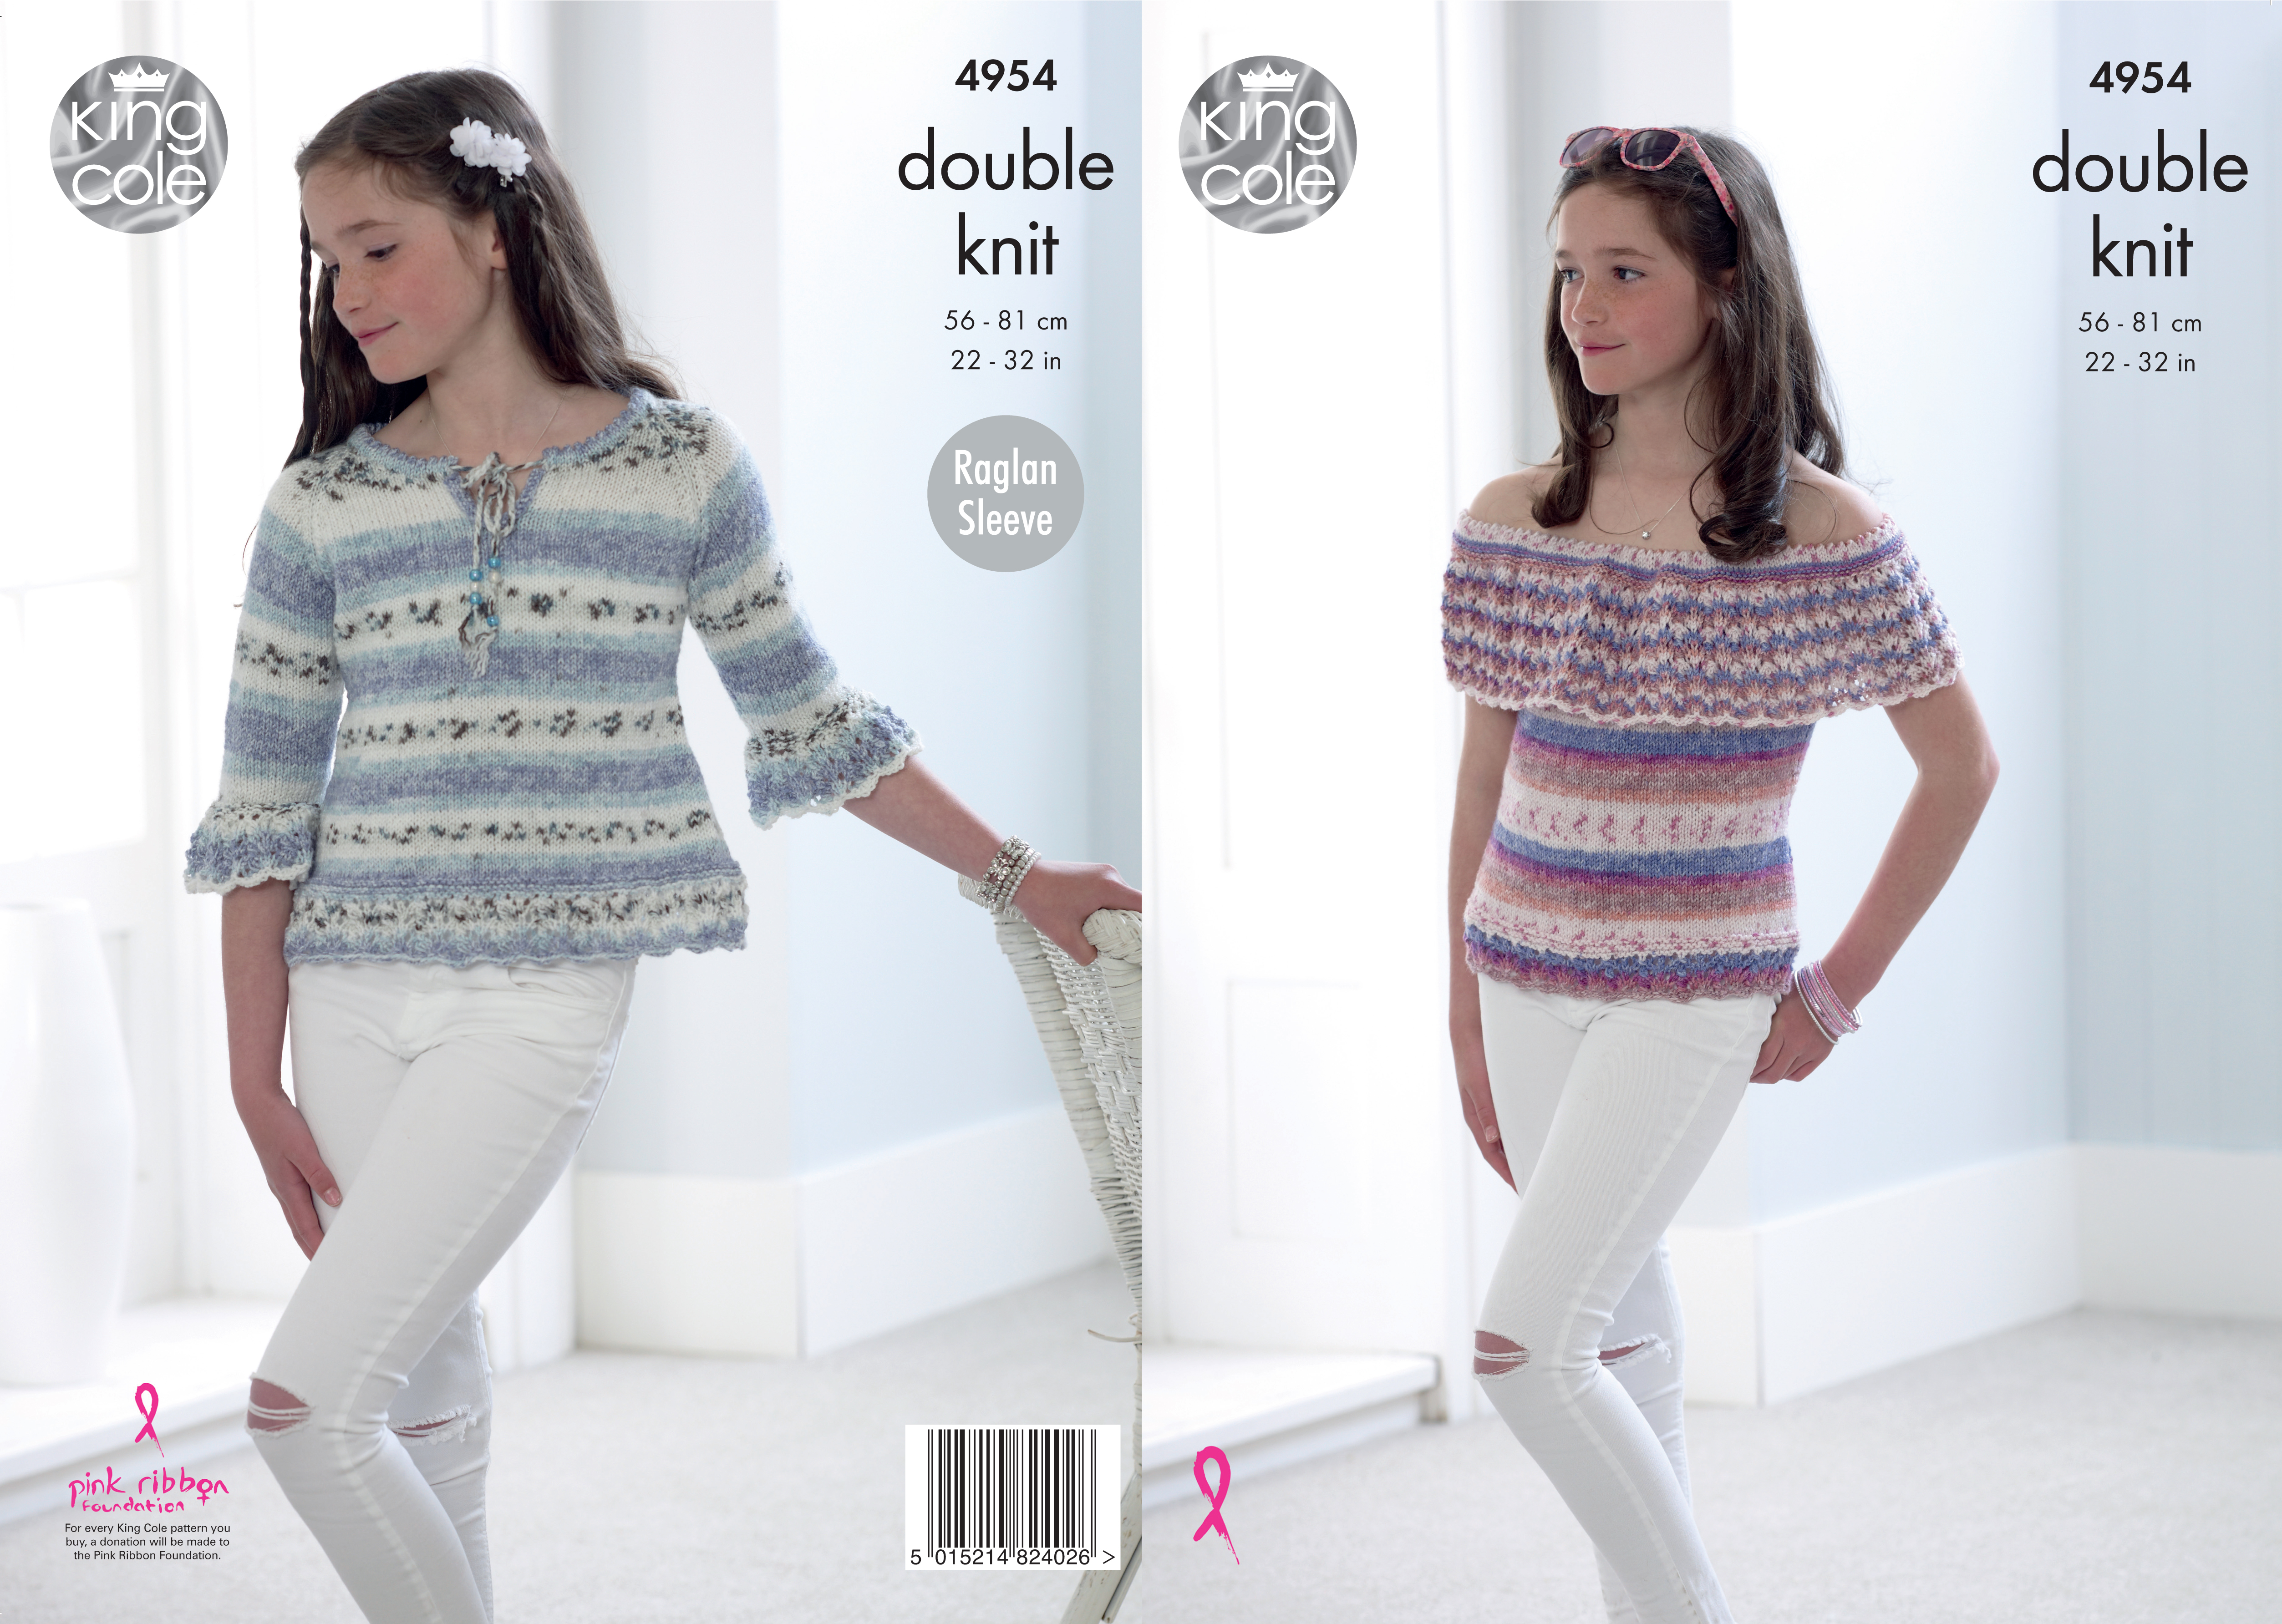 Top & Sweater Knitted in Splash DK 4954 x3 - Click Image to Close